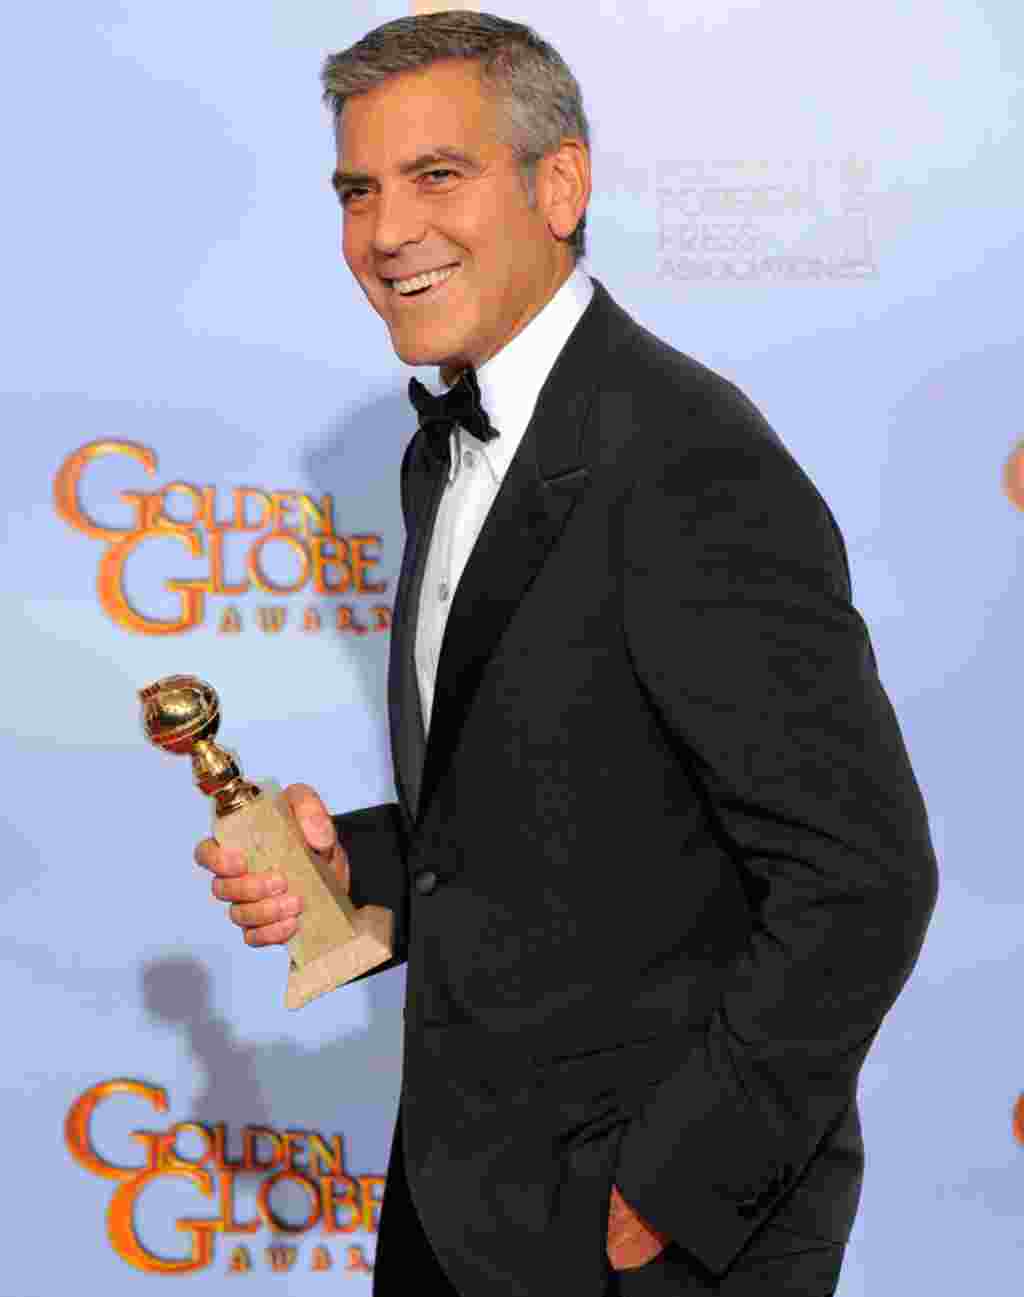 Actor George Clooney poses backstage with the award for Best Actor in a Motion Picture Drama for the film "The Descendants" during the 69th Annual Golden Globe Awards on January 15, 2012, in Los Angeles. (AP)